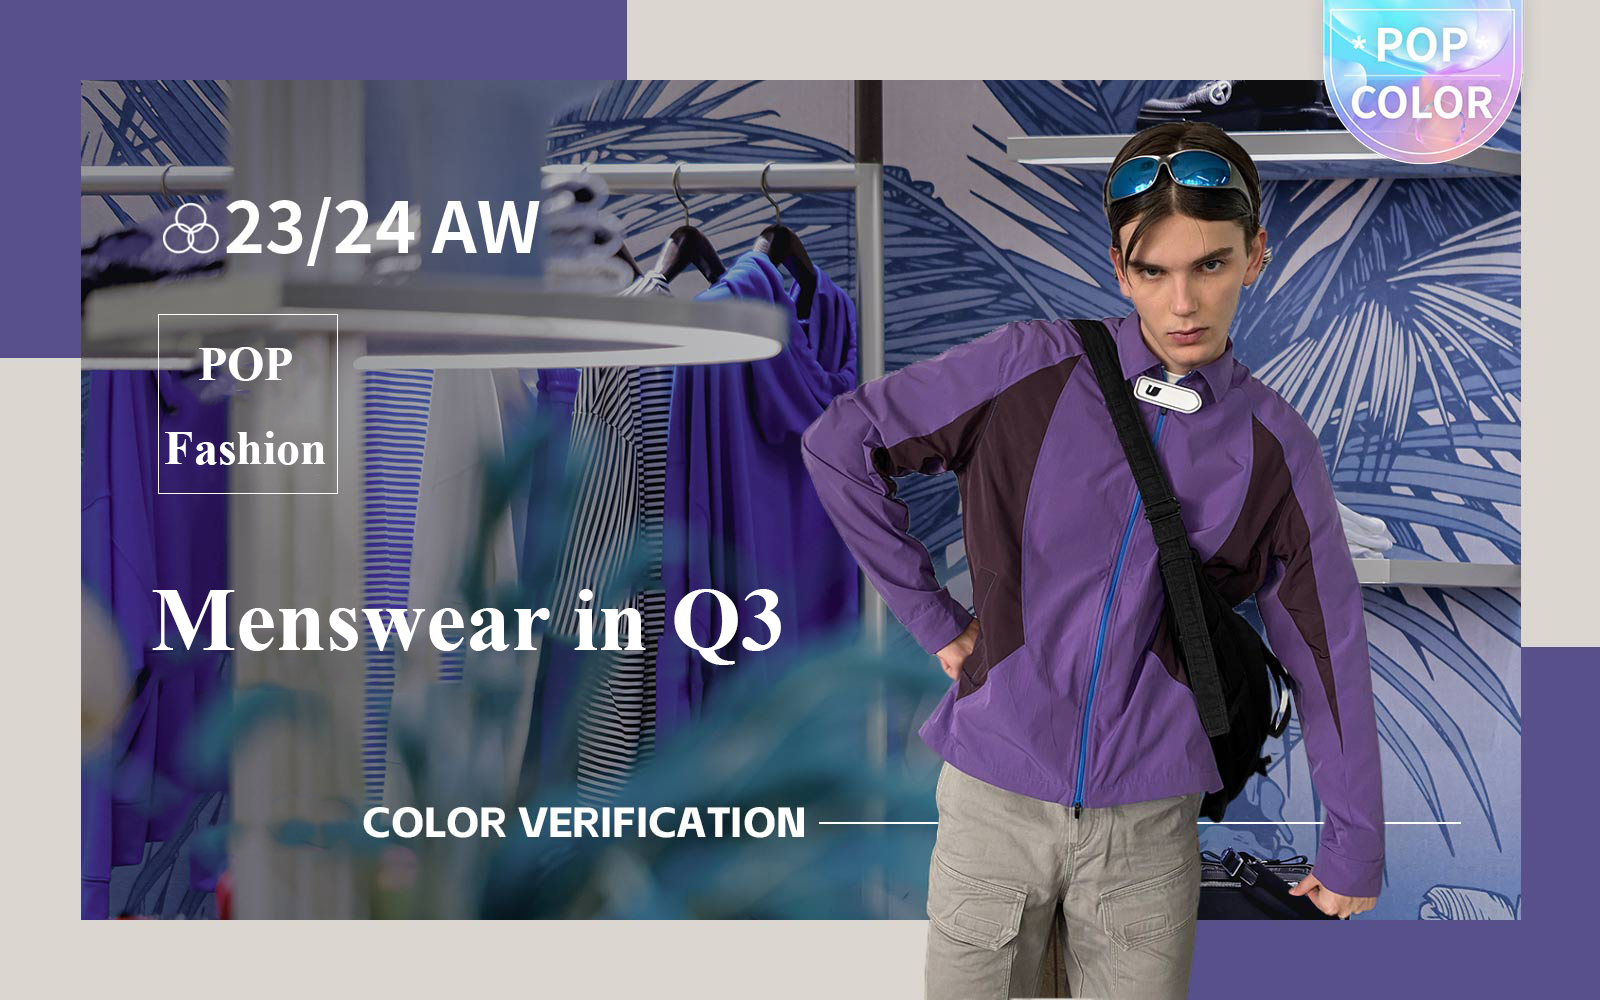 The Color Trend Verification for Menswear in Q3